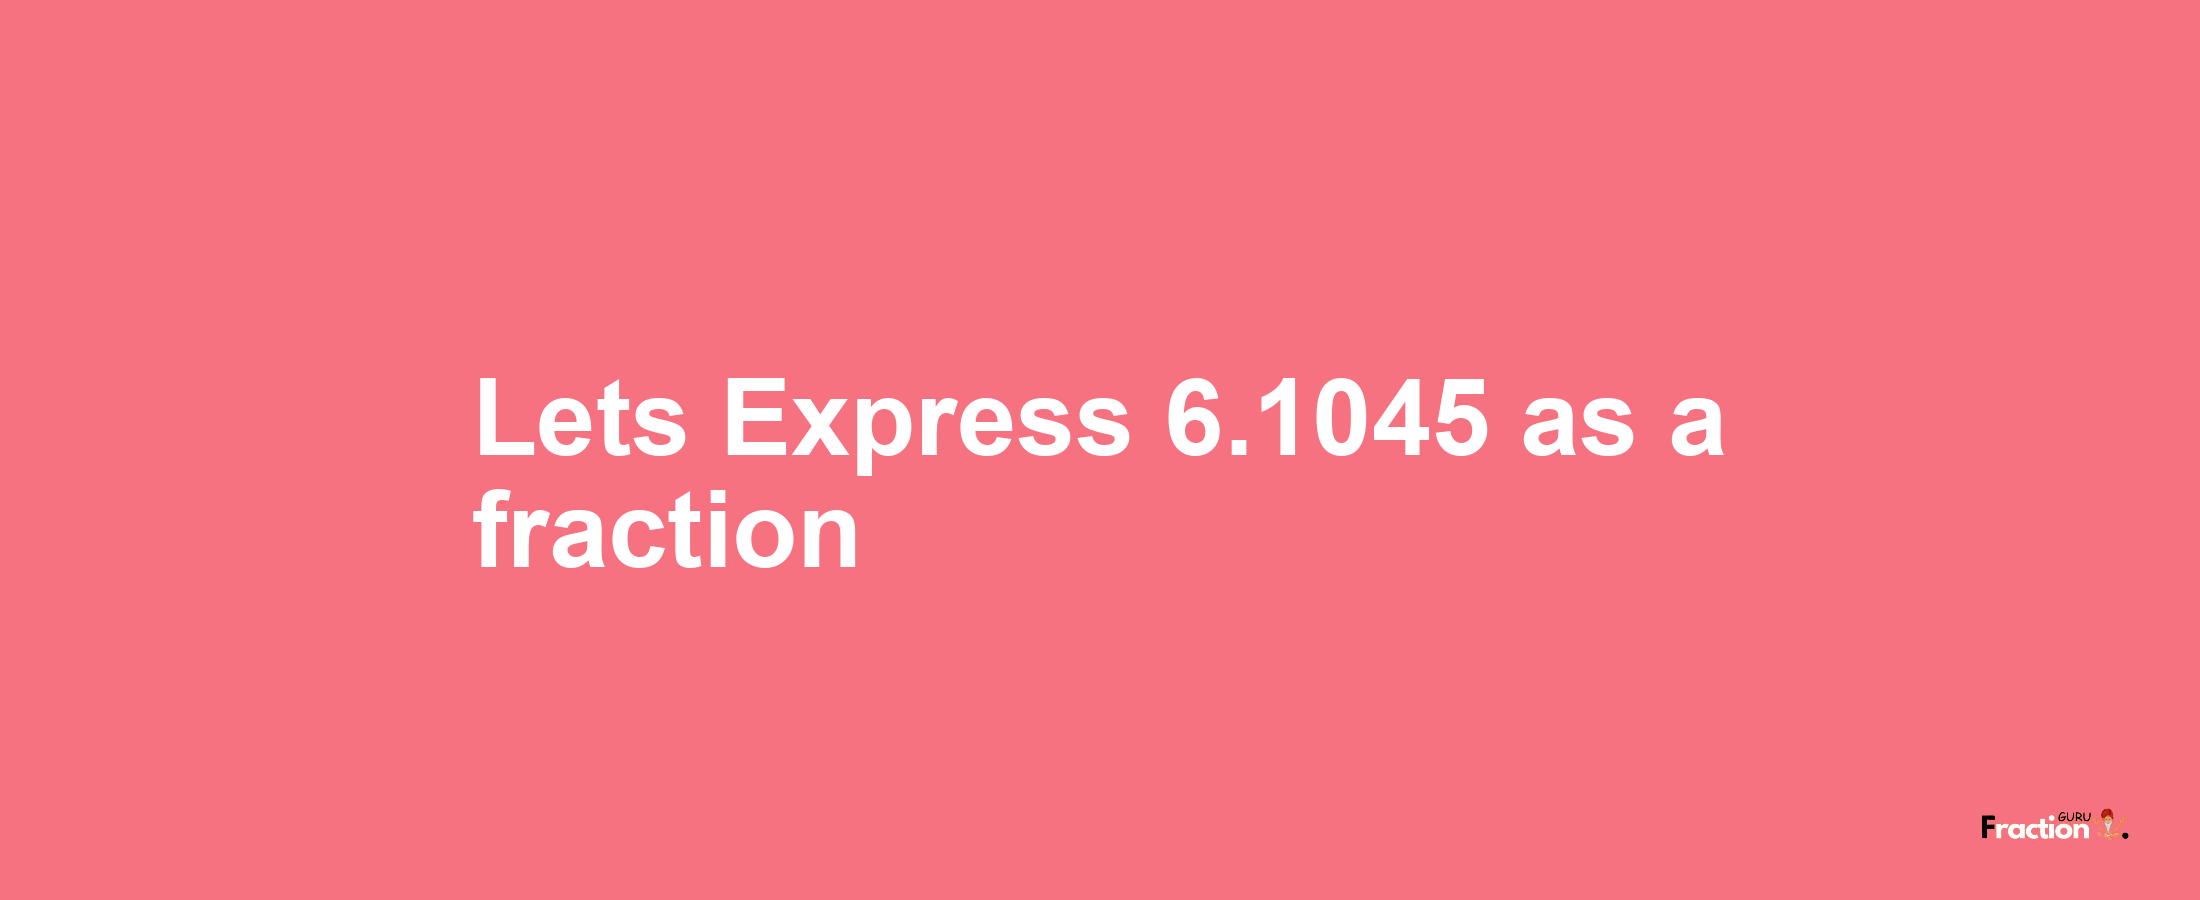 Lets Express 6.1045 as afraction